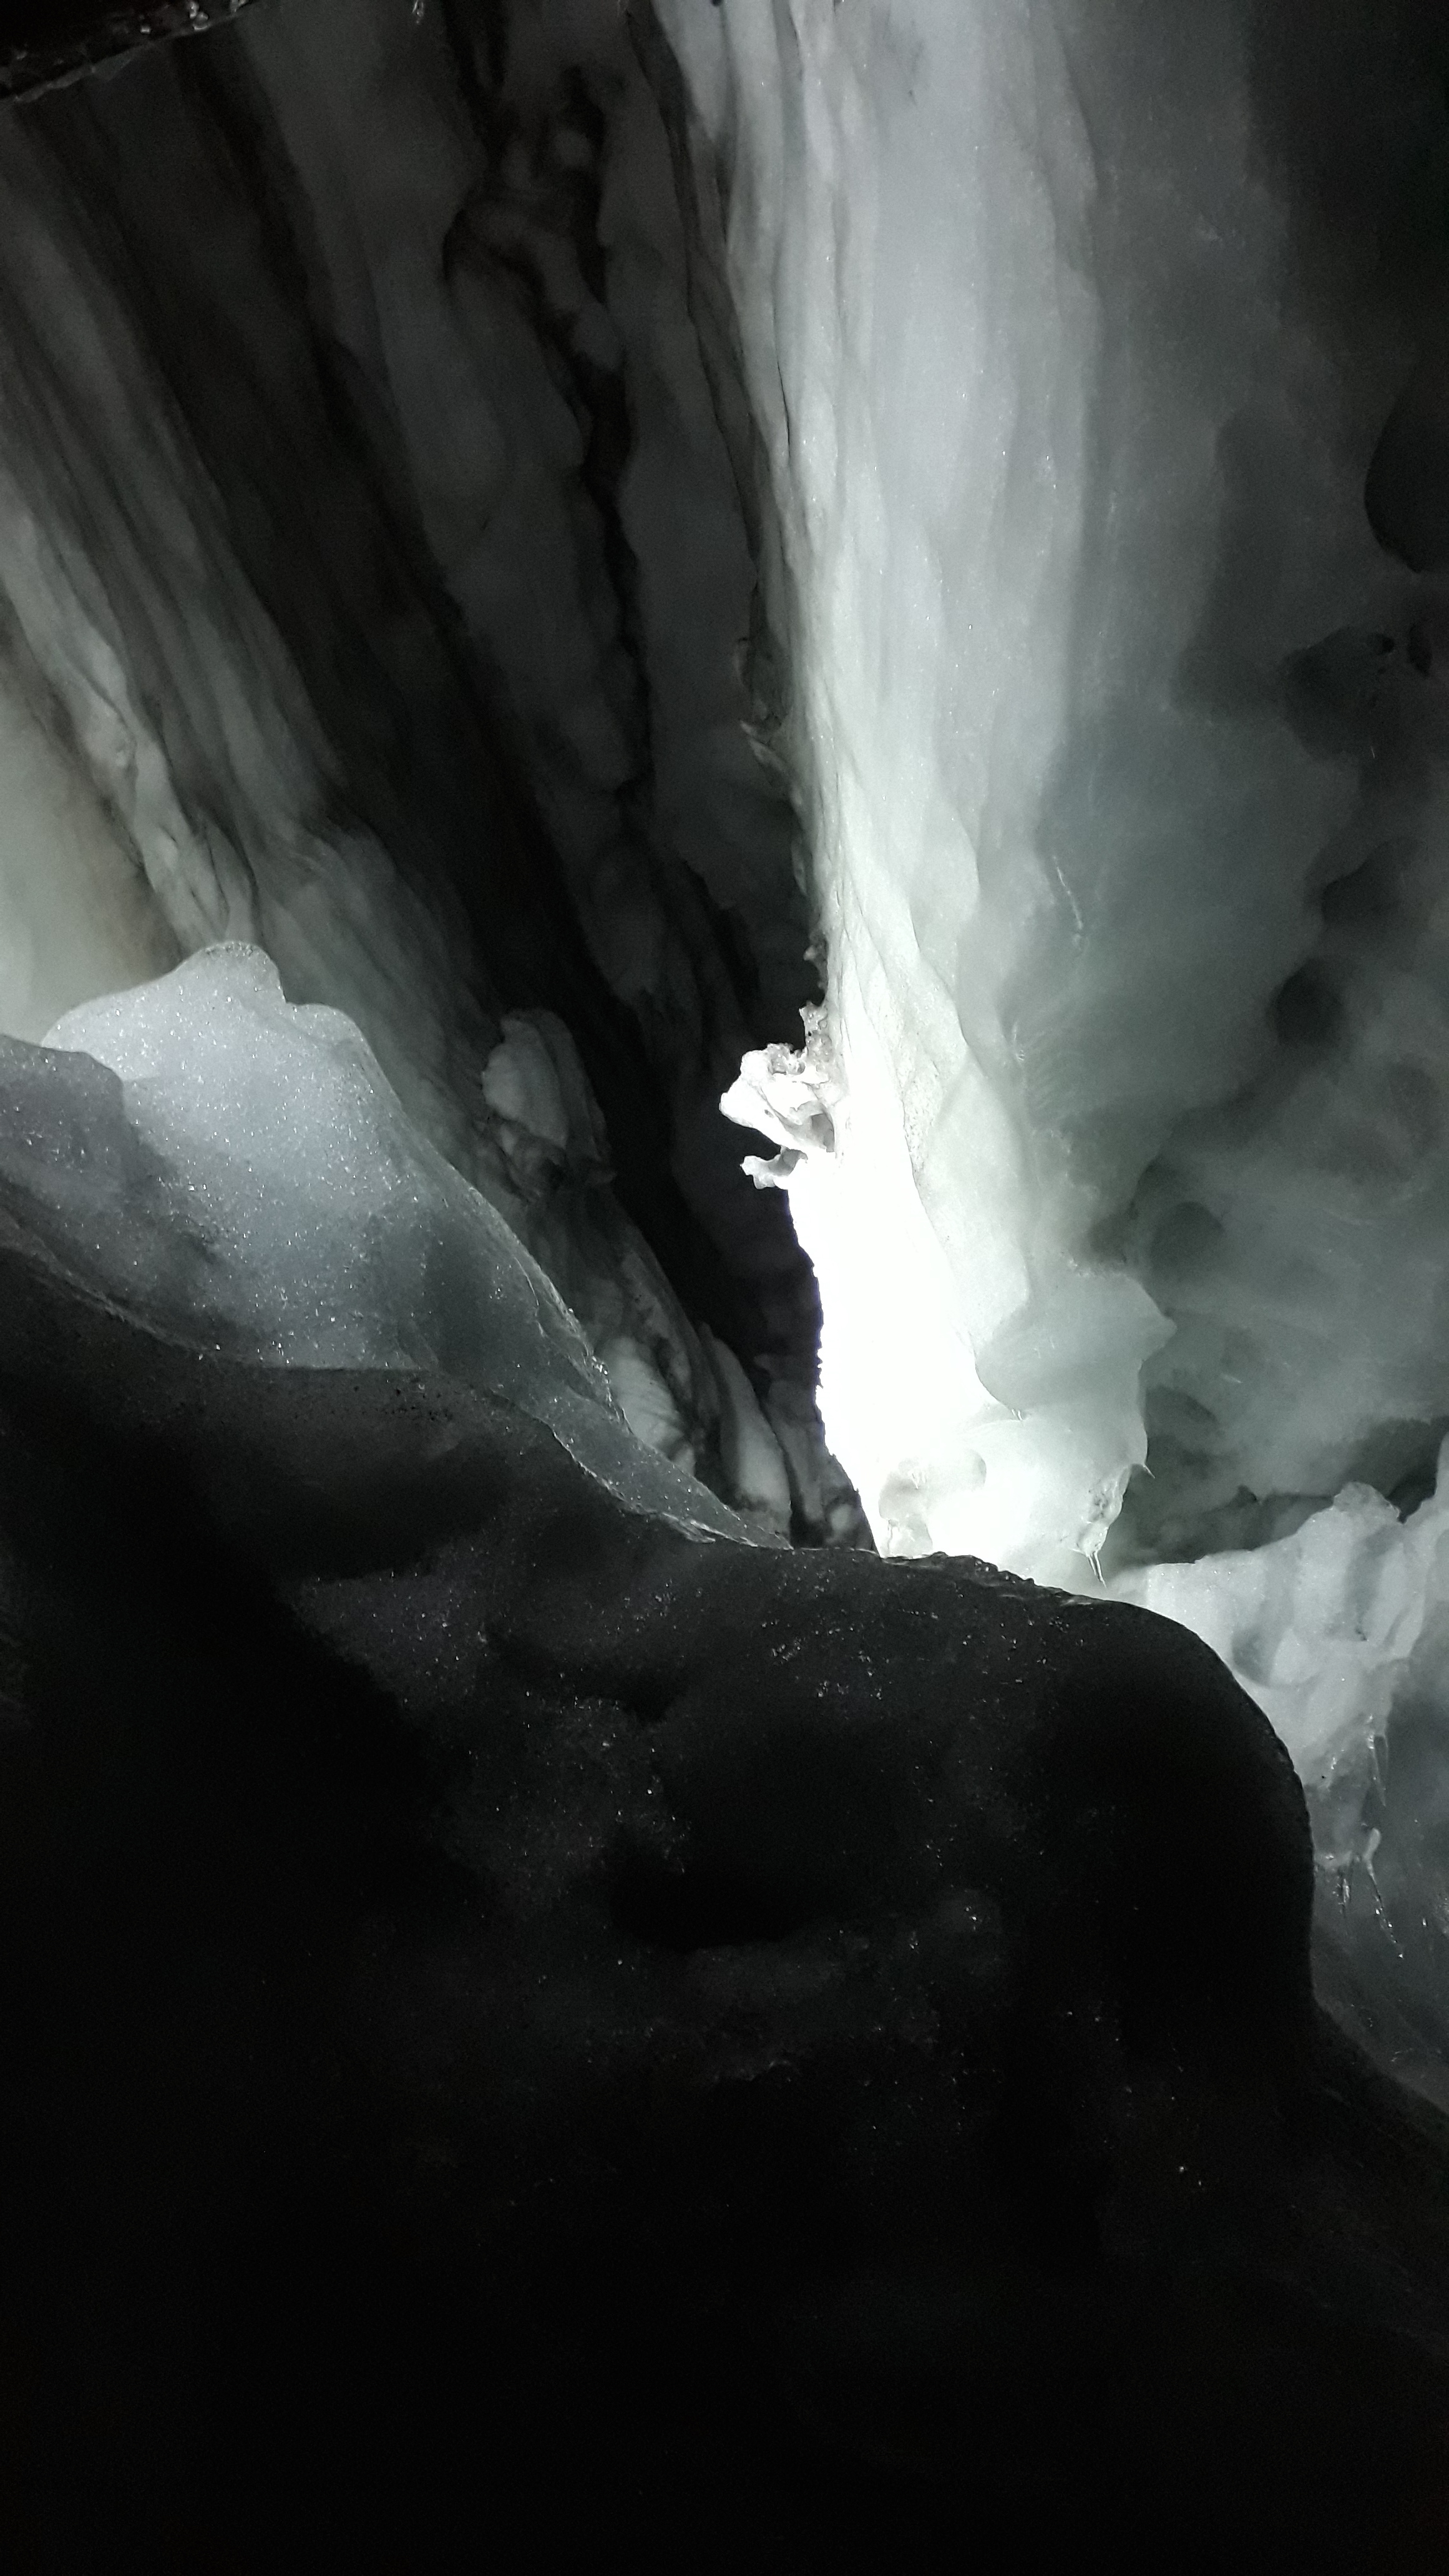 Looking up and down the crevasse